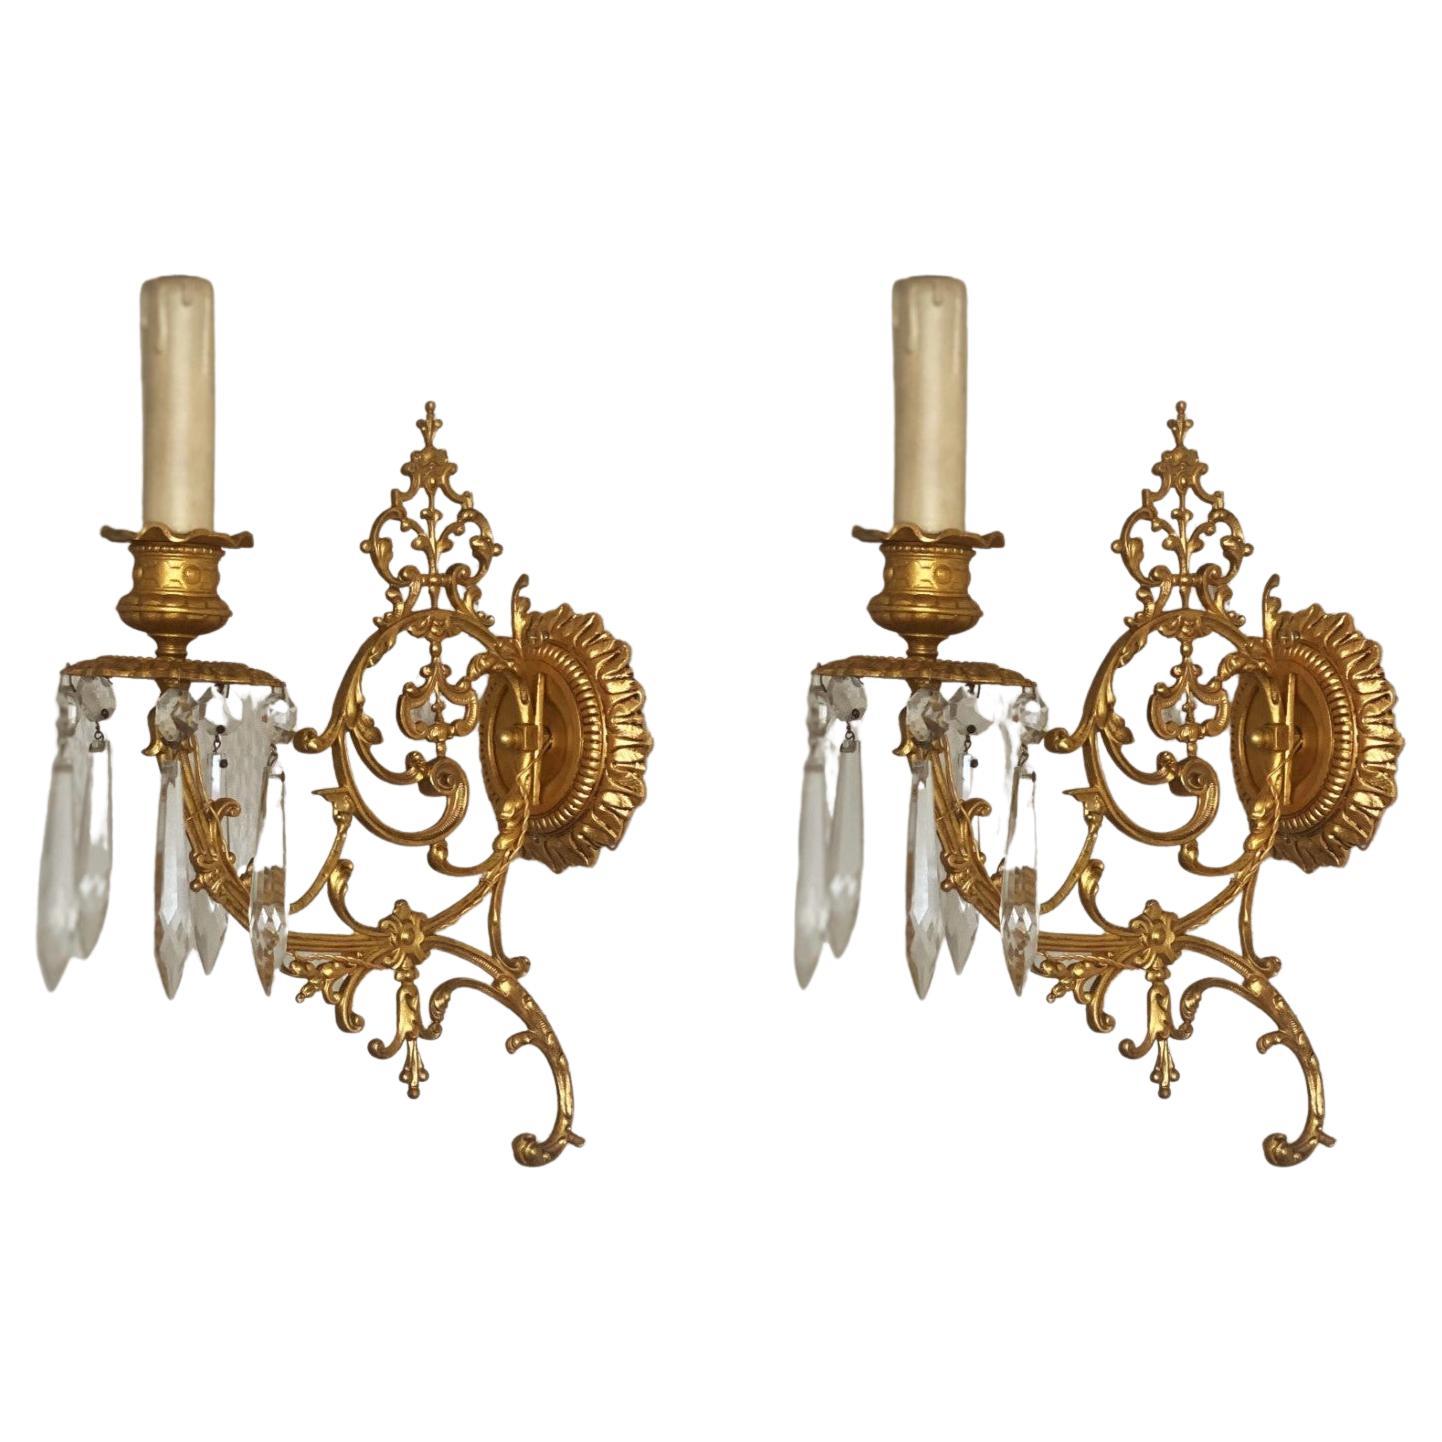 An extremely elegant and high quality set of four Louis XVI period doré bronze (fire-gilded bronze) wall candle holders, wonderfully elaborate in fine and precise detail, decorated with long crystal icicle prisms, France, late 18th century. Now